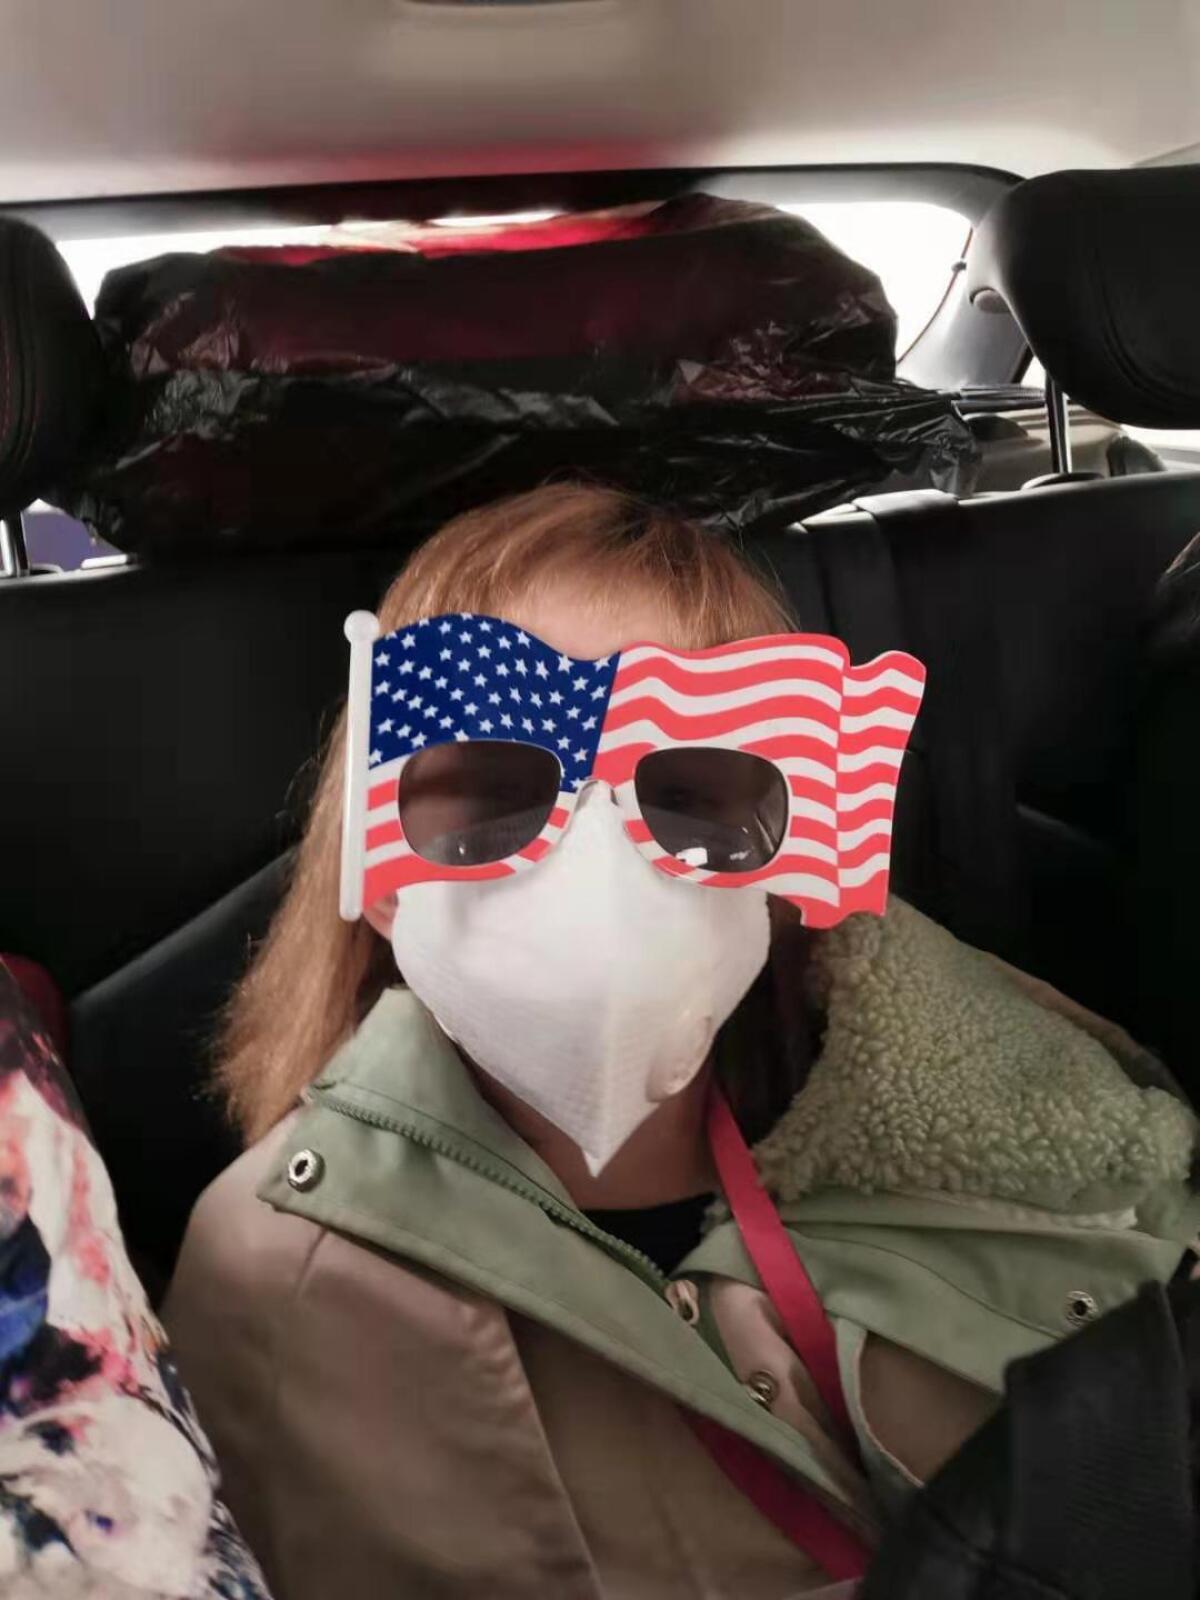 An 8-year-old American rides in a car on her way to Wuhan Tianhe International Airport for a U.S. evacuation flight Tuesday.